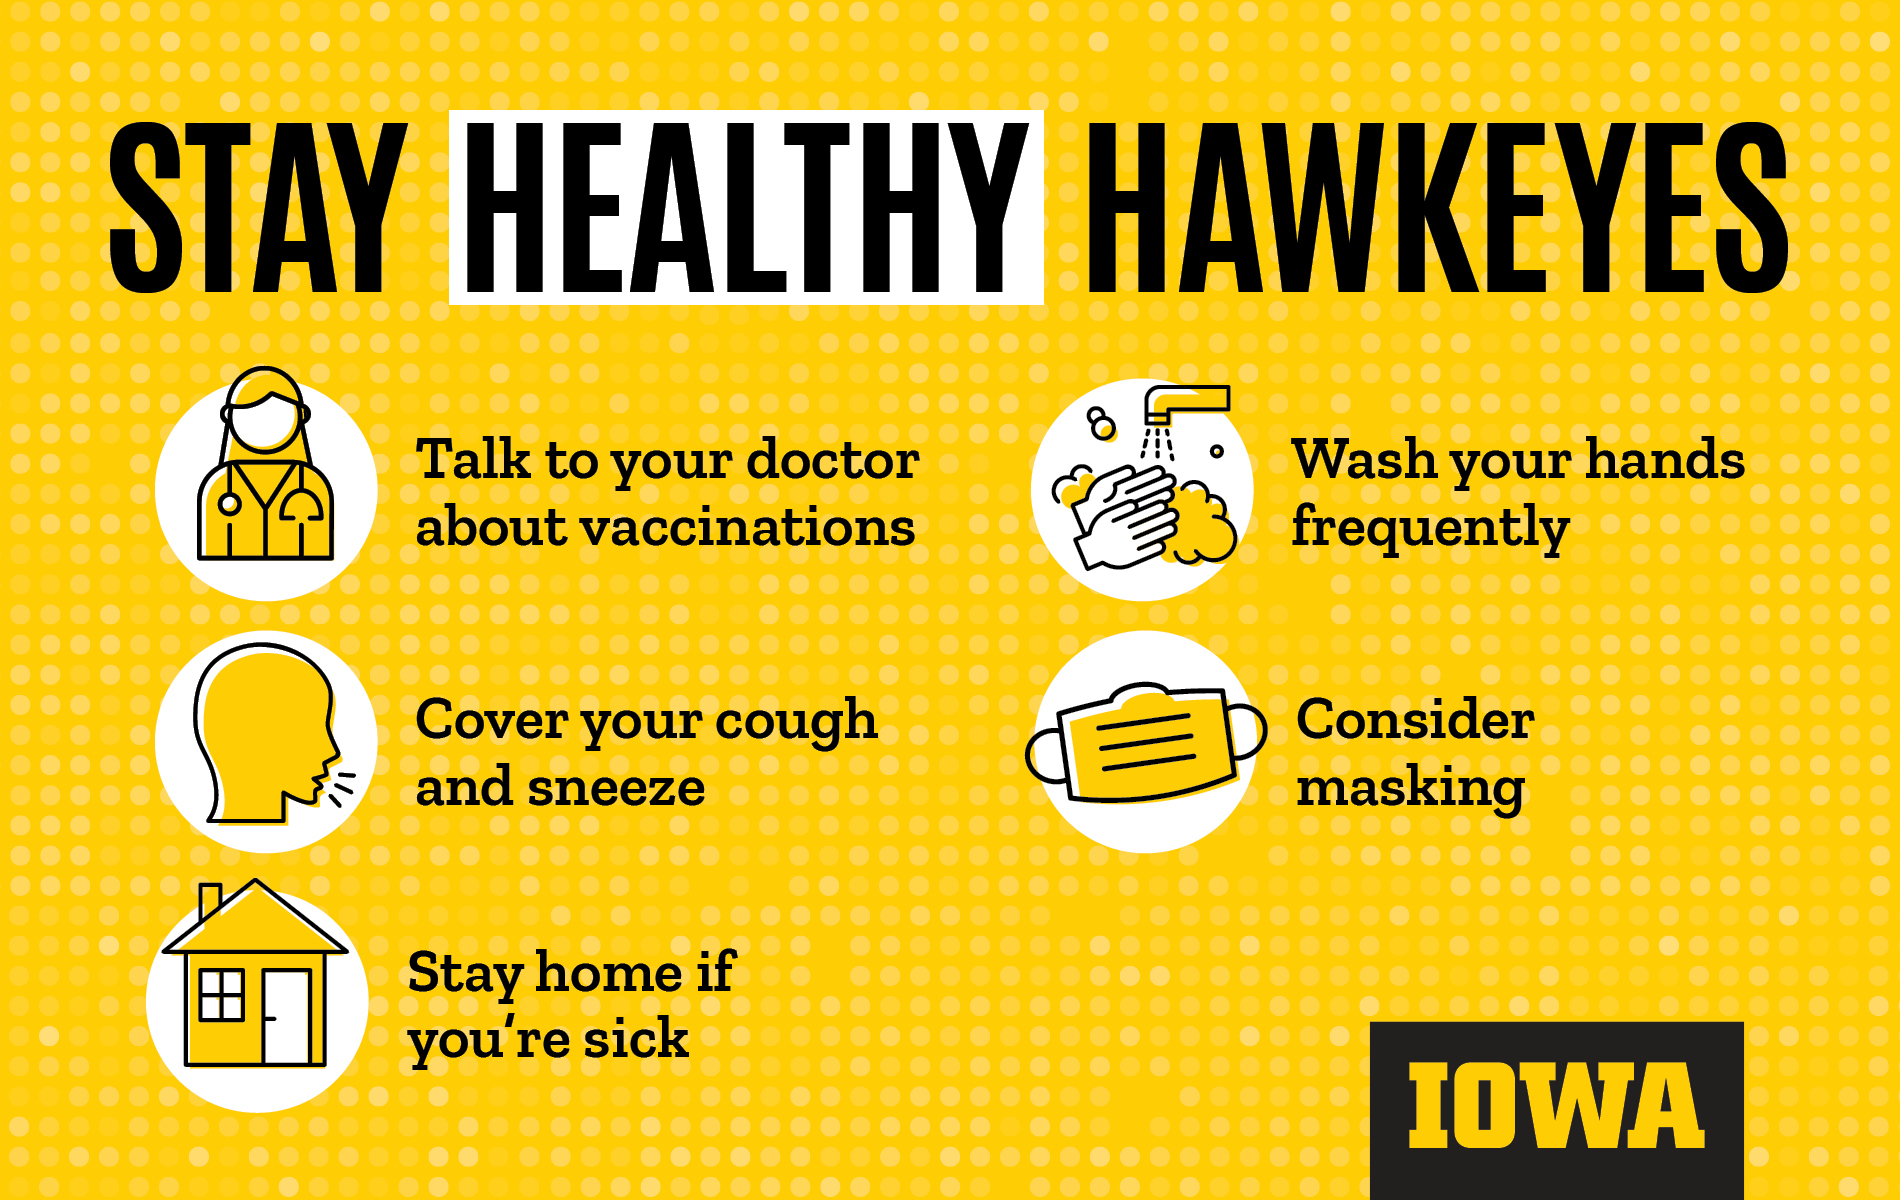 Stay Healthy Hawkeyes Talk to your doctor about vaccinations, cover your cough and sneeze, Stay home if you're sick, Wash your hands frequently, Consider masking